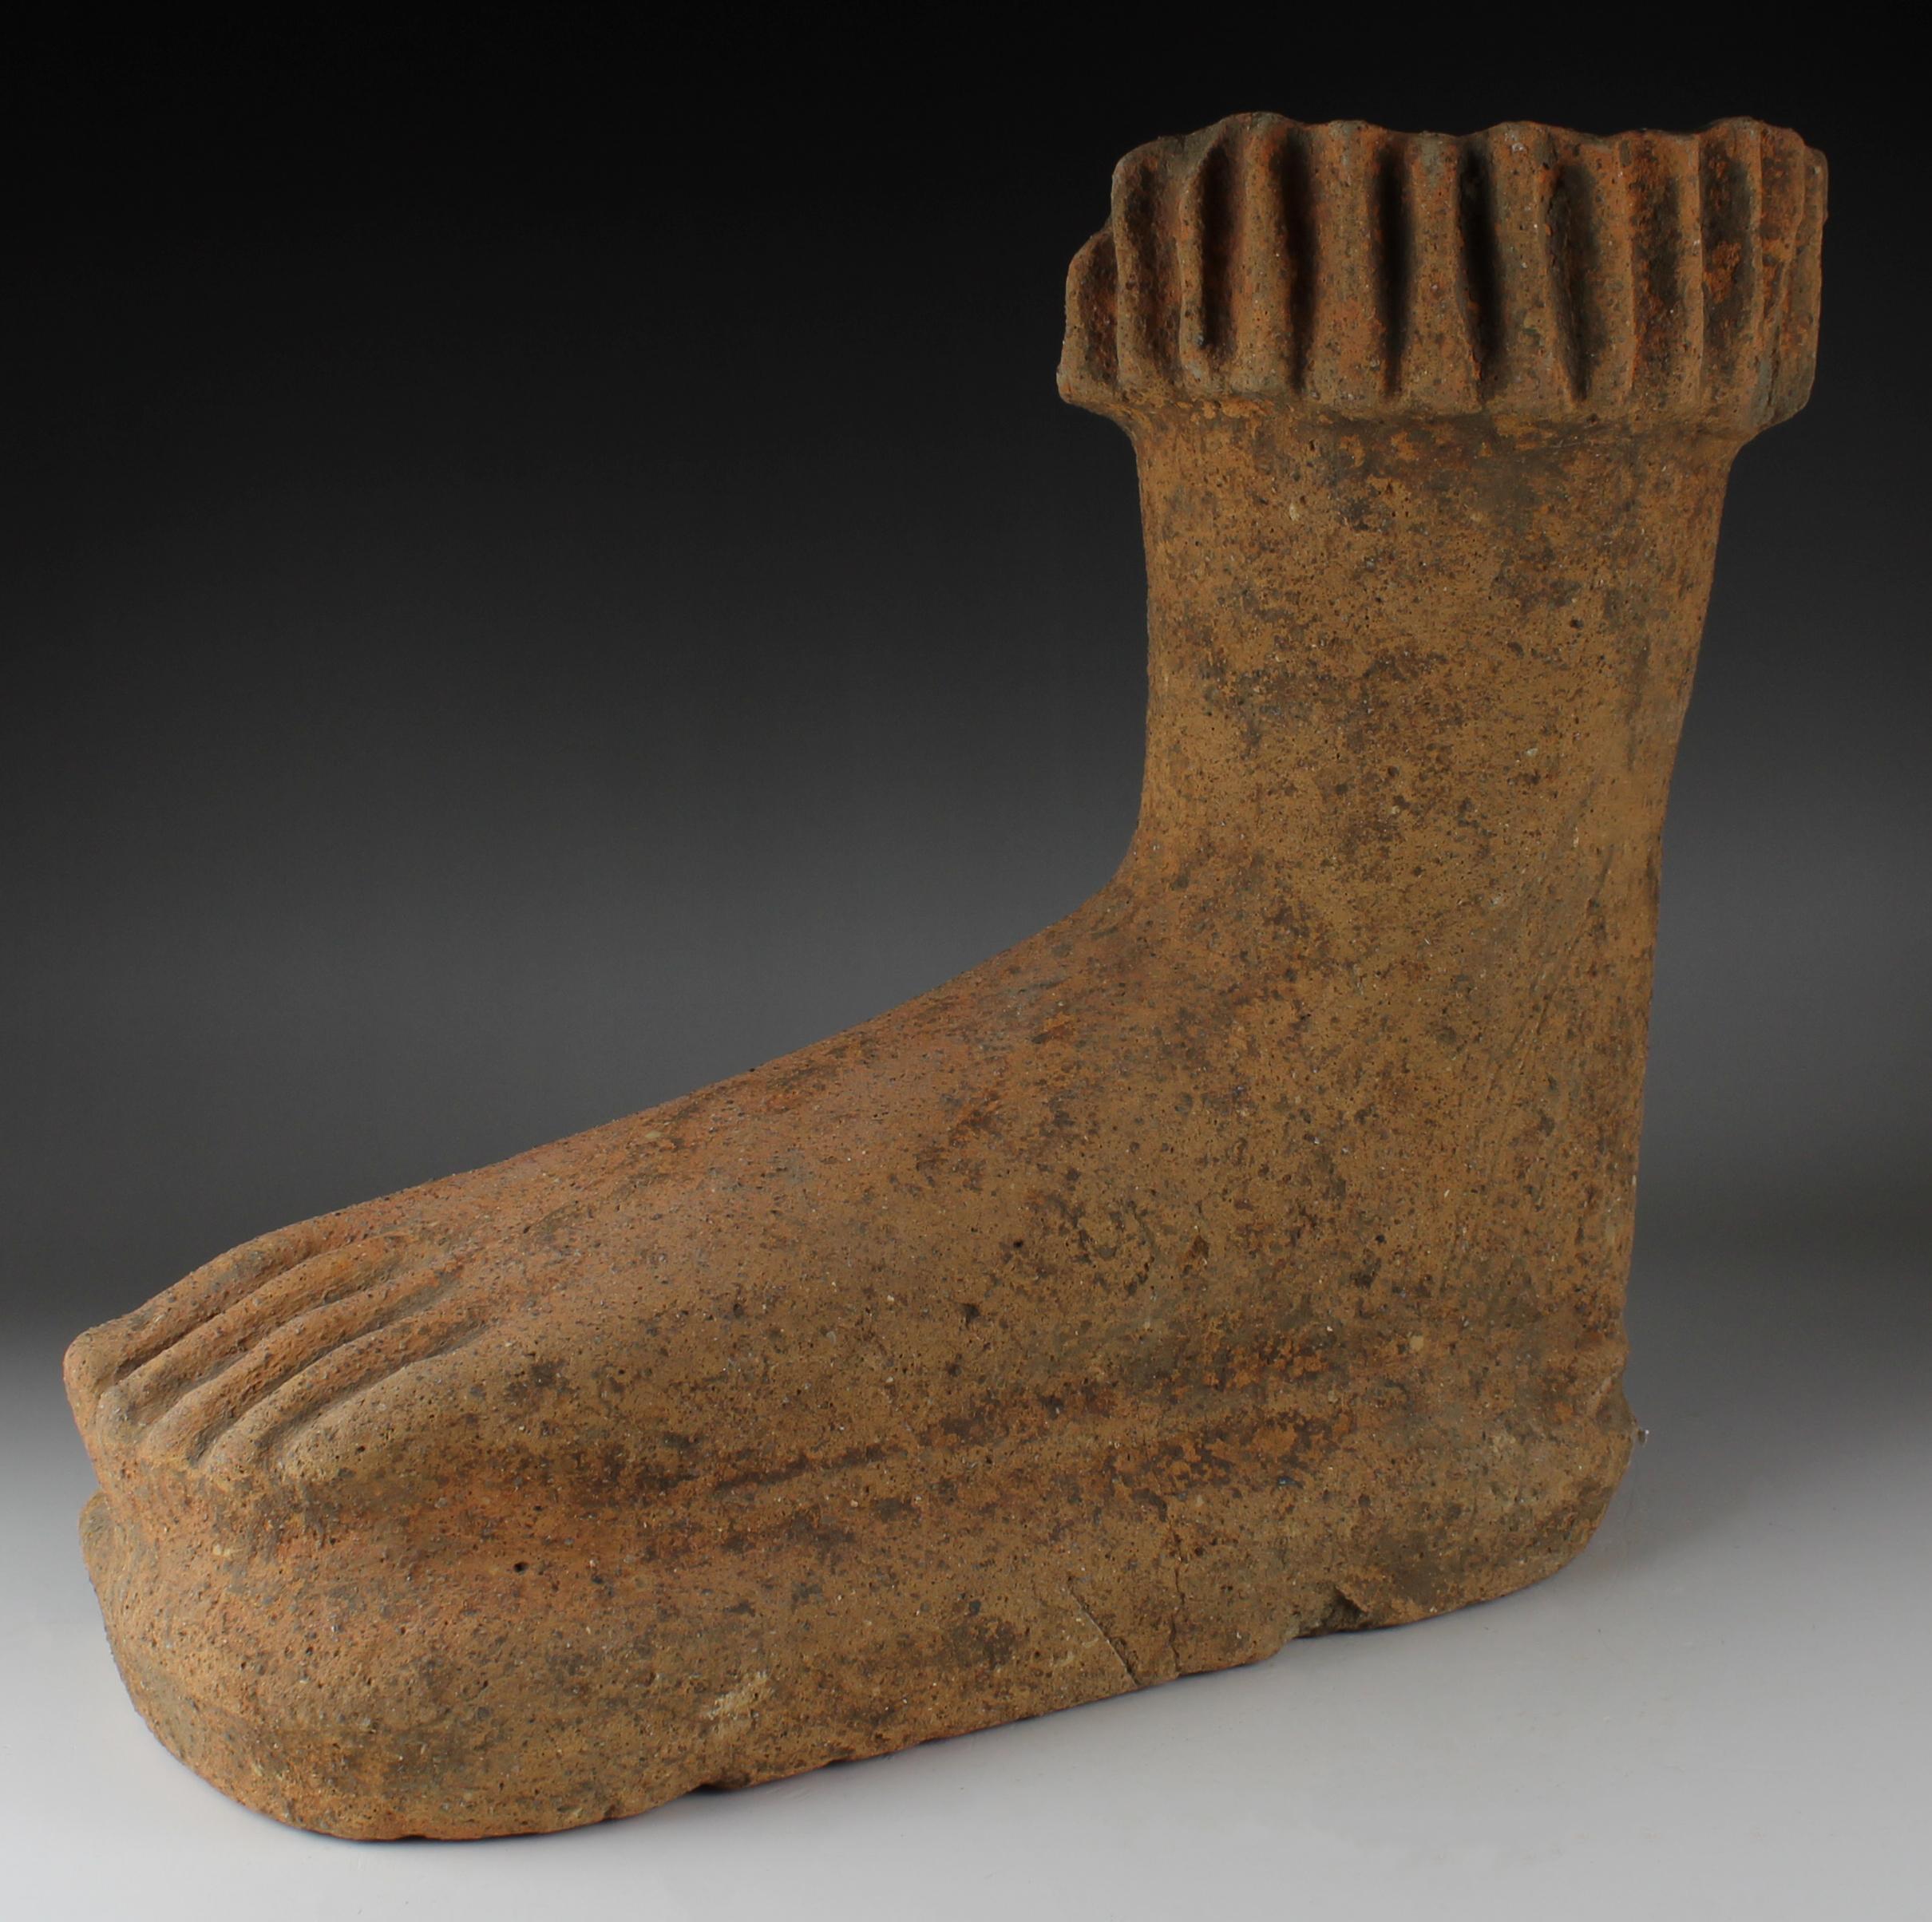 ITEM: Anatomical votive model of a foot
MATERIAL: Terracotta
CULTURE: Etruscan
PERIOD: 5th – 4th Century B.C
DIMENSIONS: 270 mm x 315 mm x 135 mm
CONDITION: Good condition
PROVENANCE: Ex American private collection, Maryland. Ex Black Cat